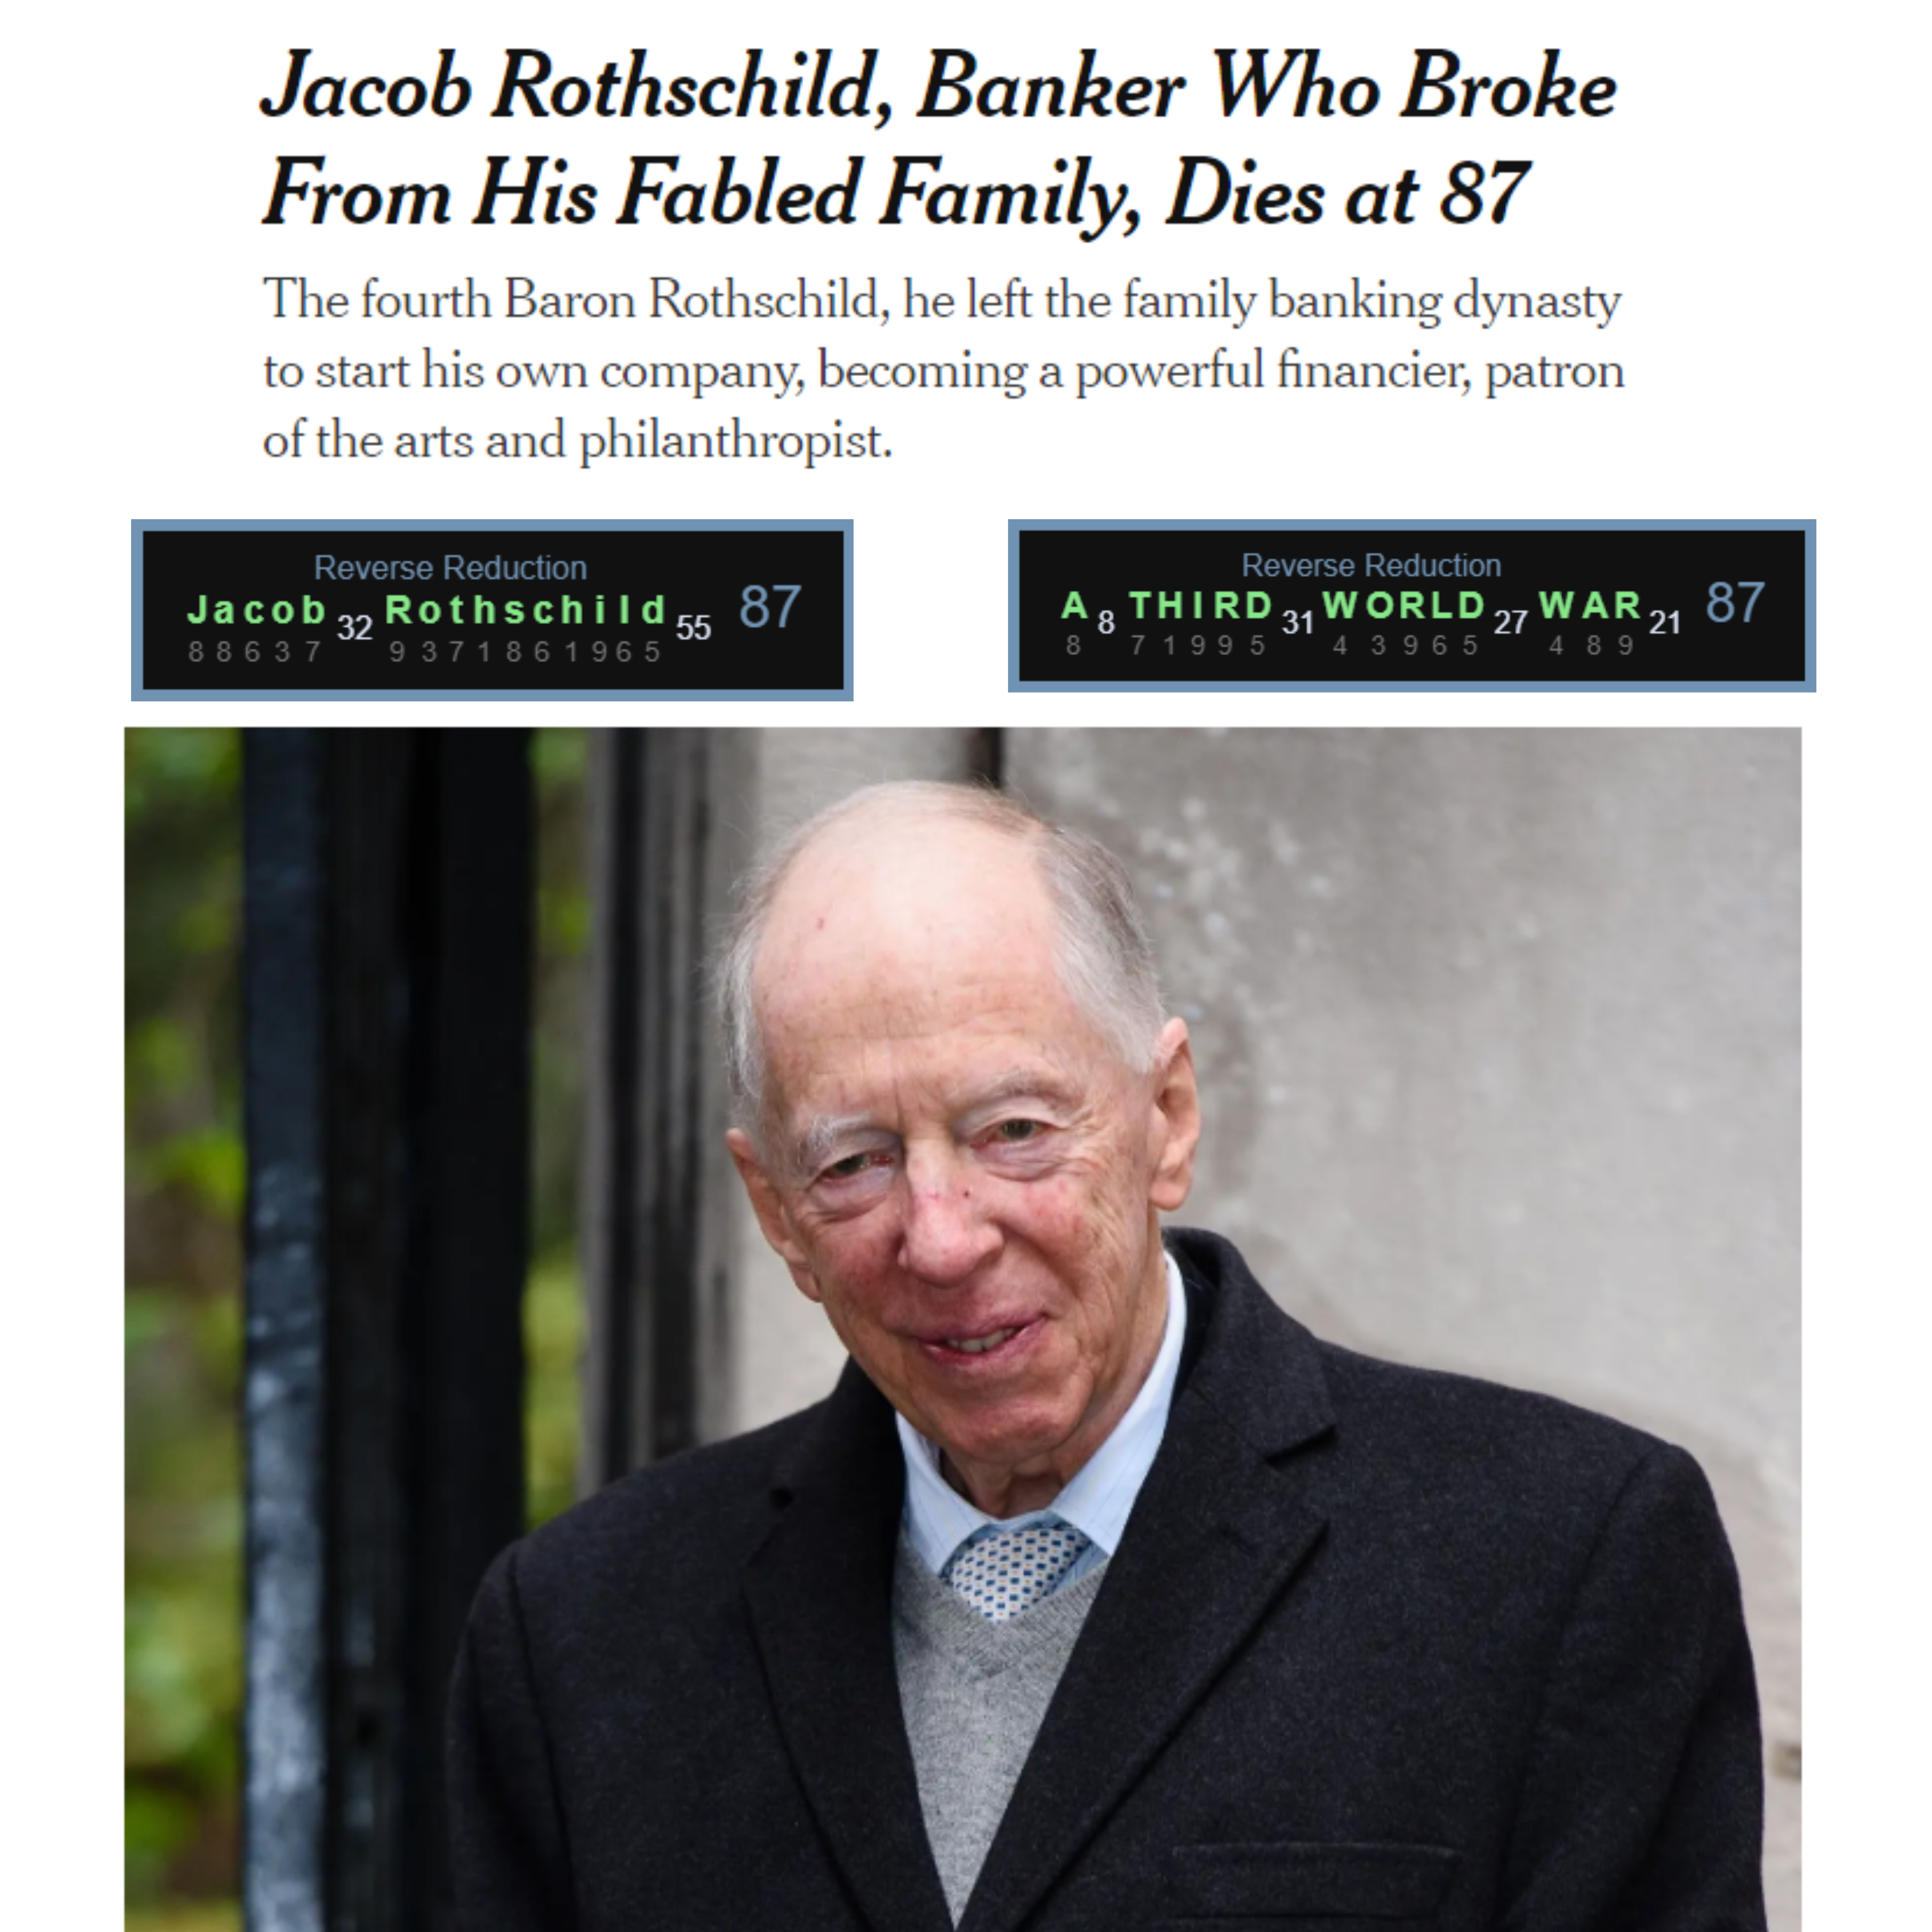 Jacob Rothschild, Banker Who Broke From His Fabled Family, Dies At 87